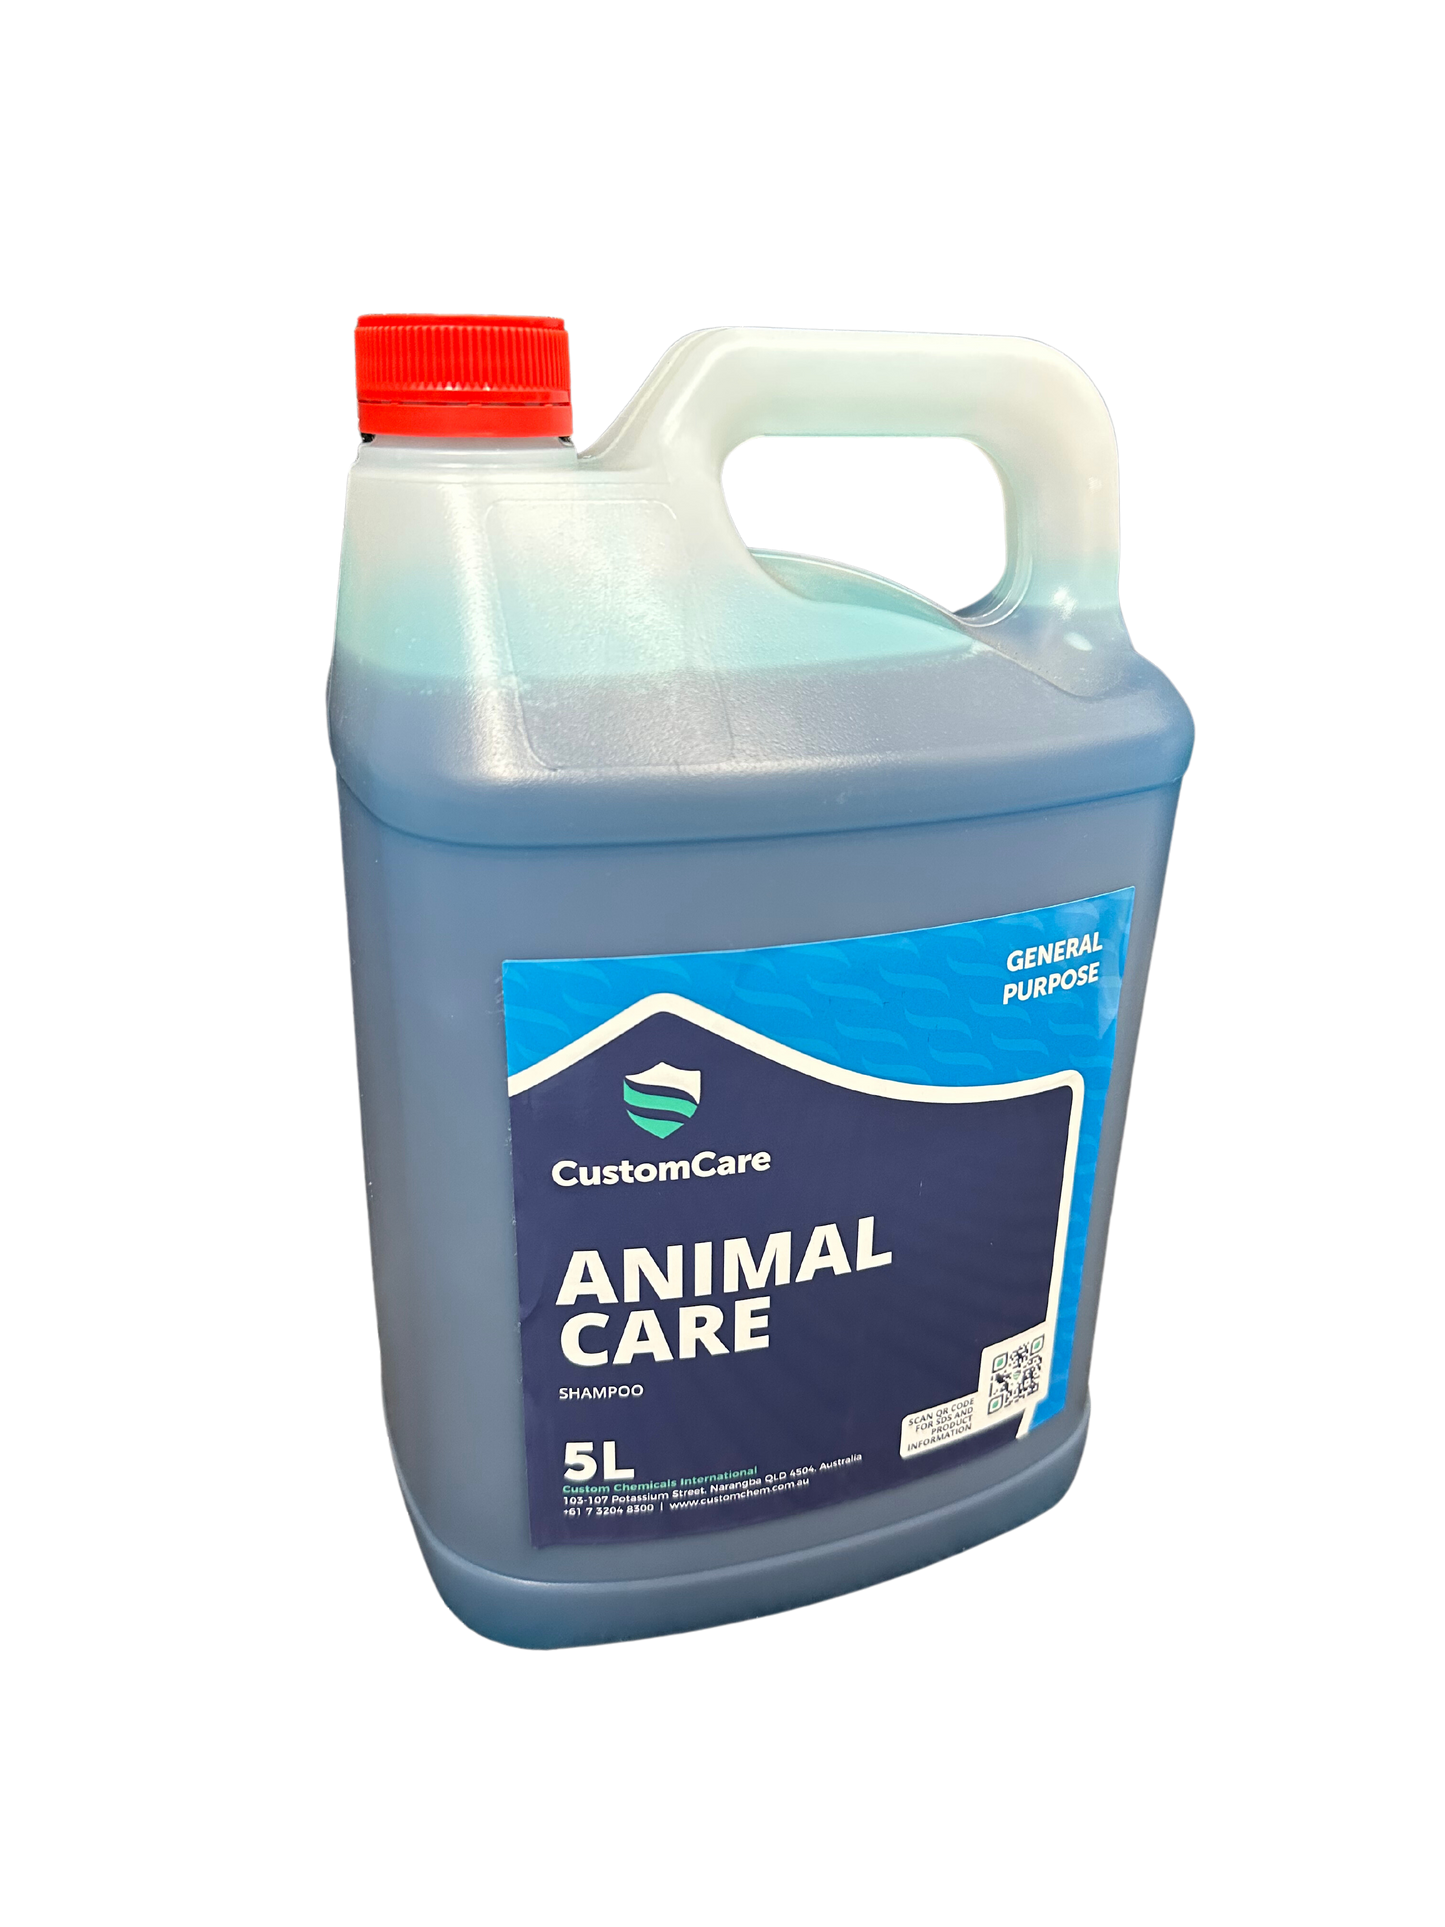 Animal Care Shampoo has been specially formulated to give the best results in the Care and grooming of Horses, Cattle & Domestic Pets. Mackay